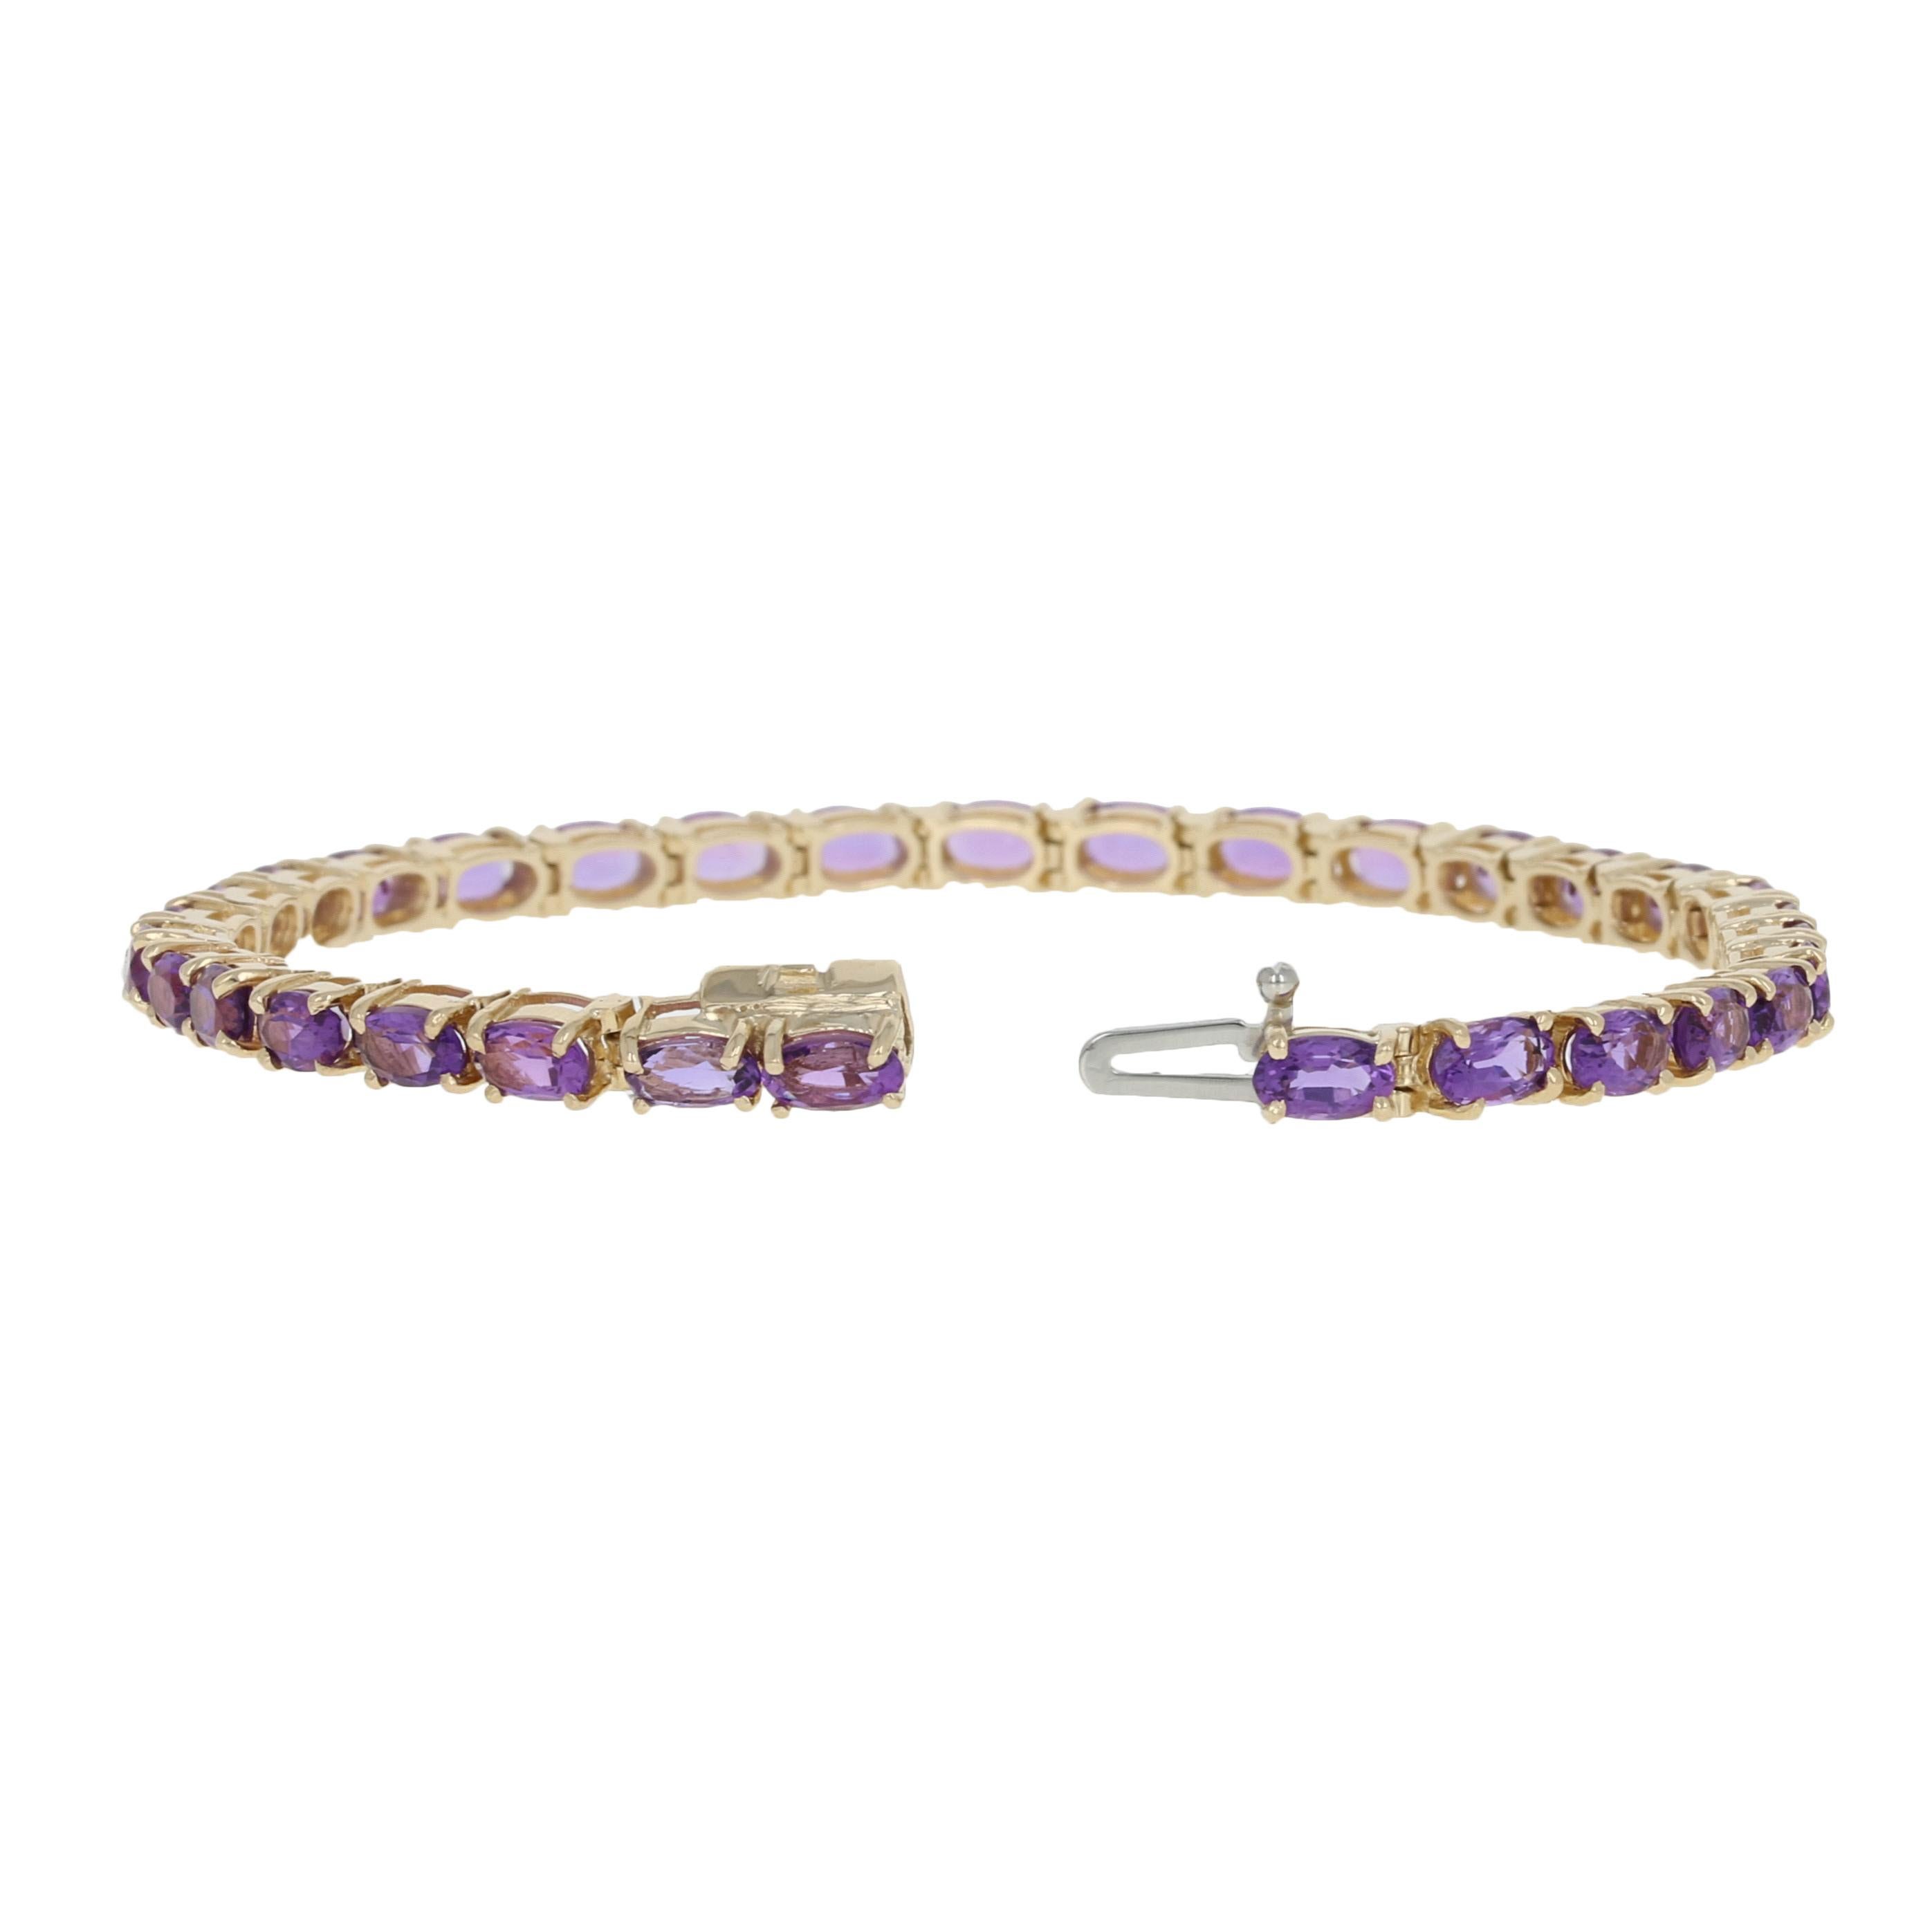 Fashioned in a sophisticated tennis style, this bracelet showcases silky purple amethysts set in glowing 14k yellow gold. 
 
 Metal Content: Guaranteed 14k Gold as stamped
 
 Stone Information:
 Genuine Amethysts - 
 Color: Purple 
 Cut: Oval 
